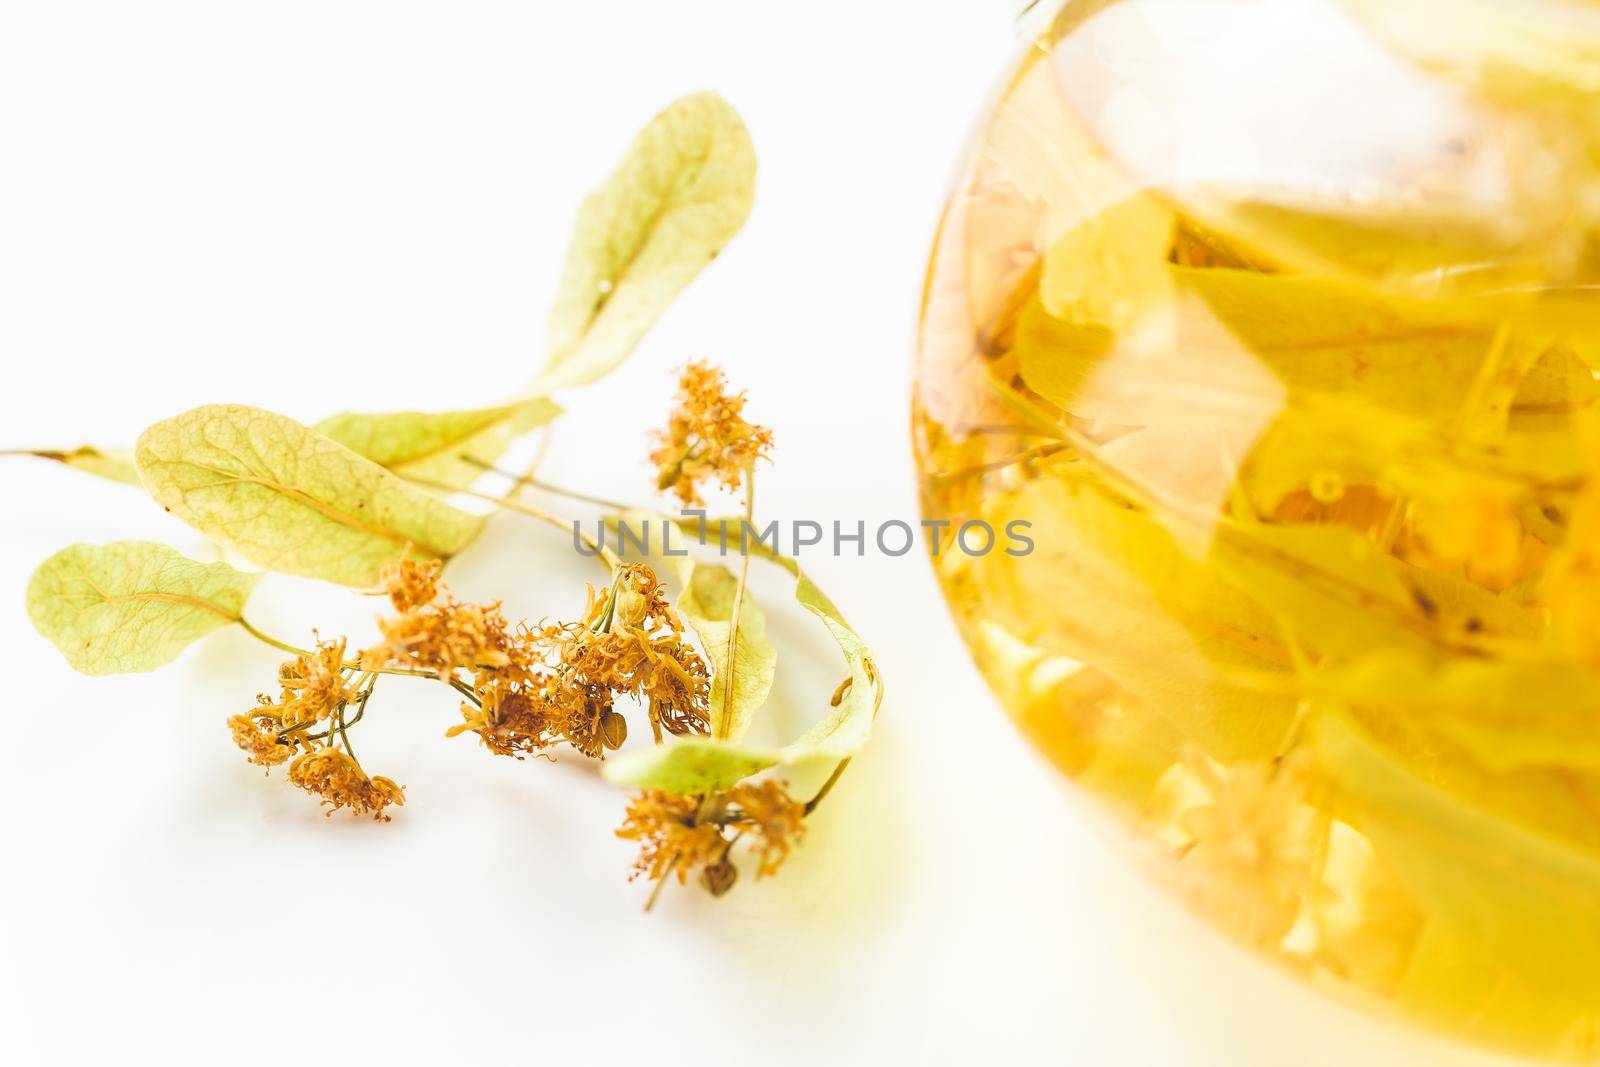 Transparent teapot with linden or tilia tea flowers brewed with hot water 